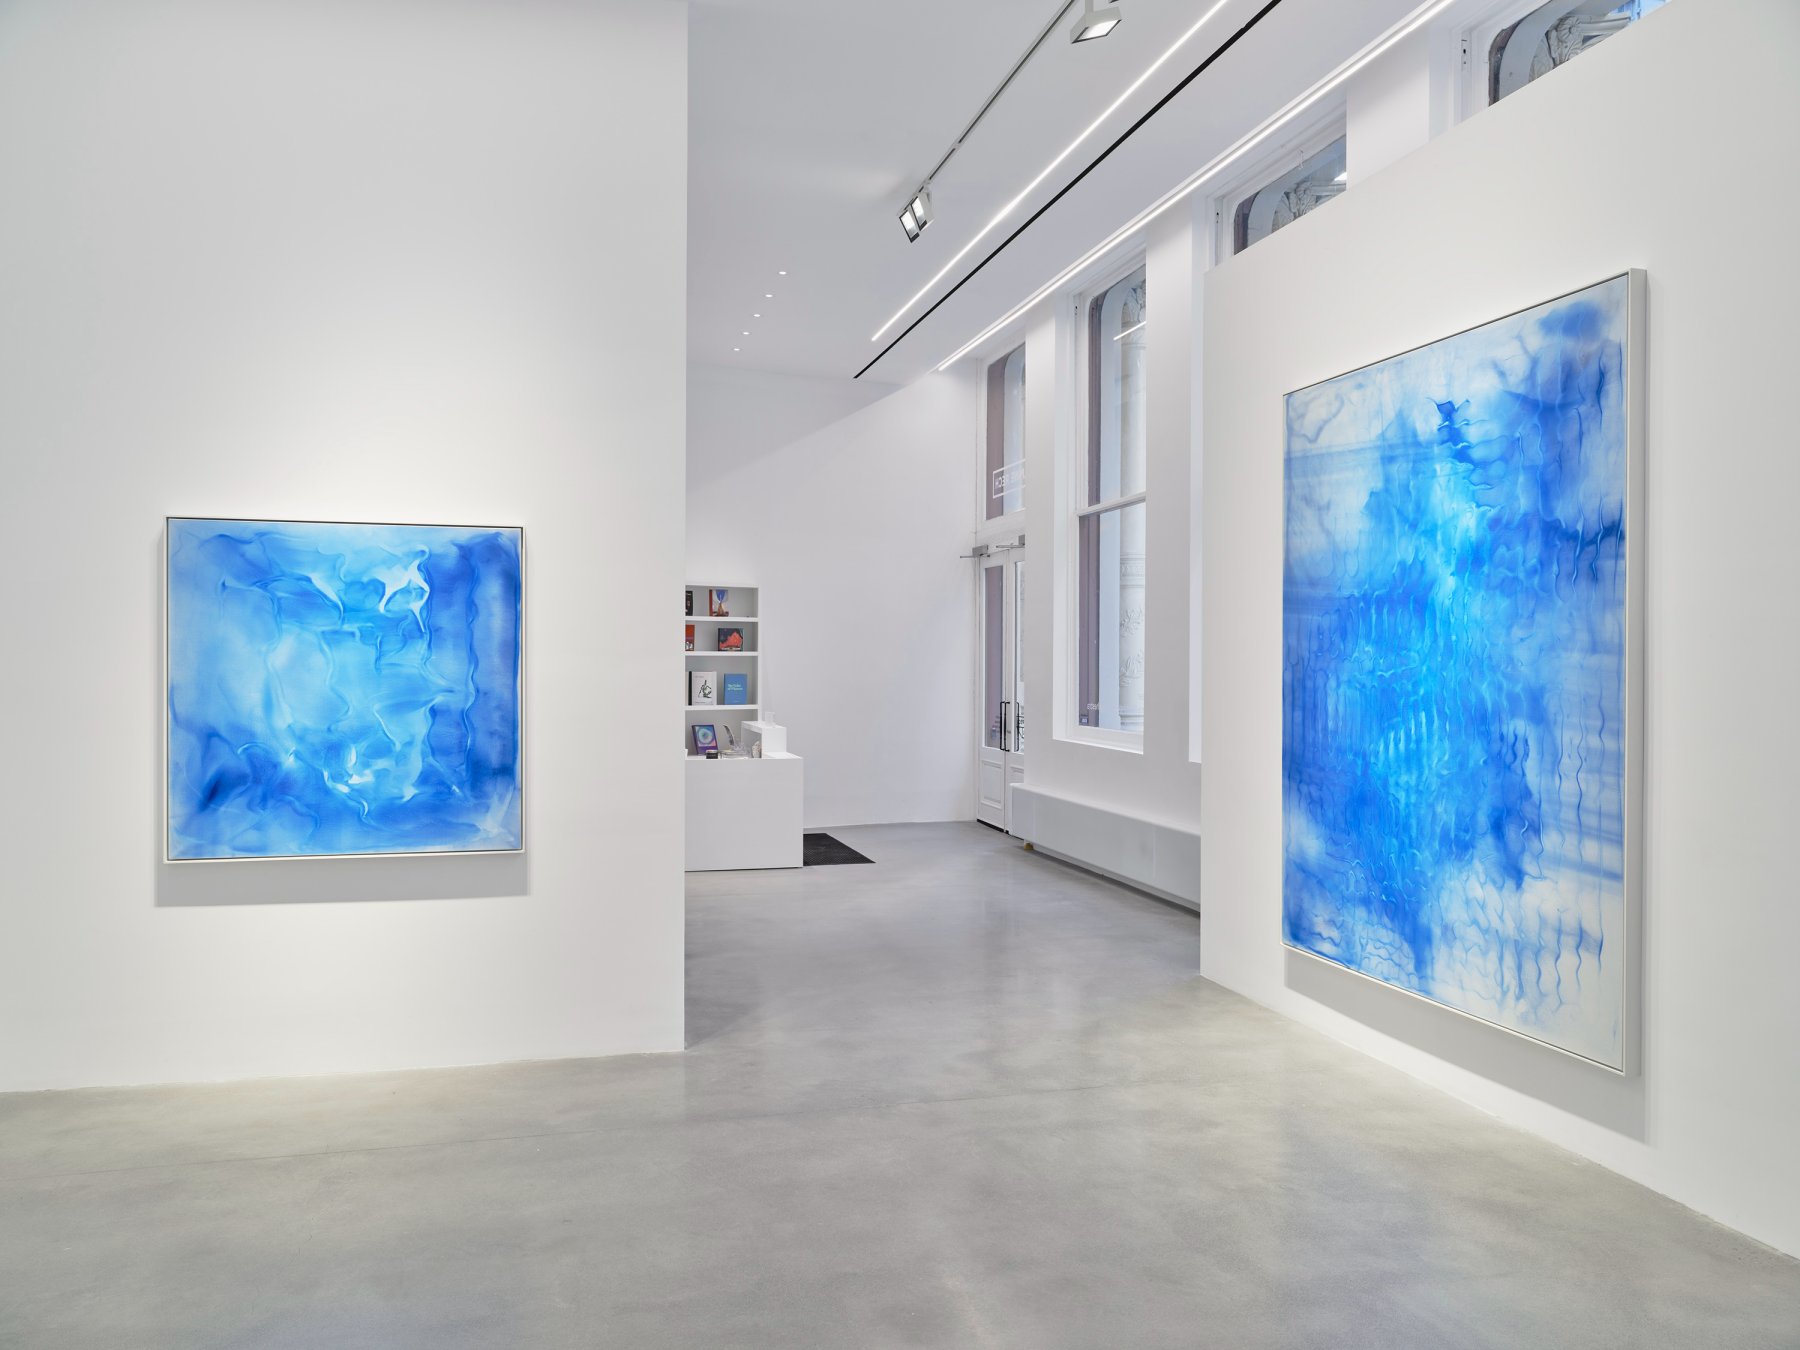 Installation image for Oliver Beer: Resonance Paintings - Cat Orchestra, at Almine Rech